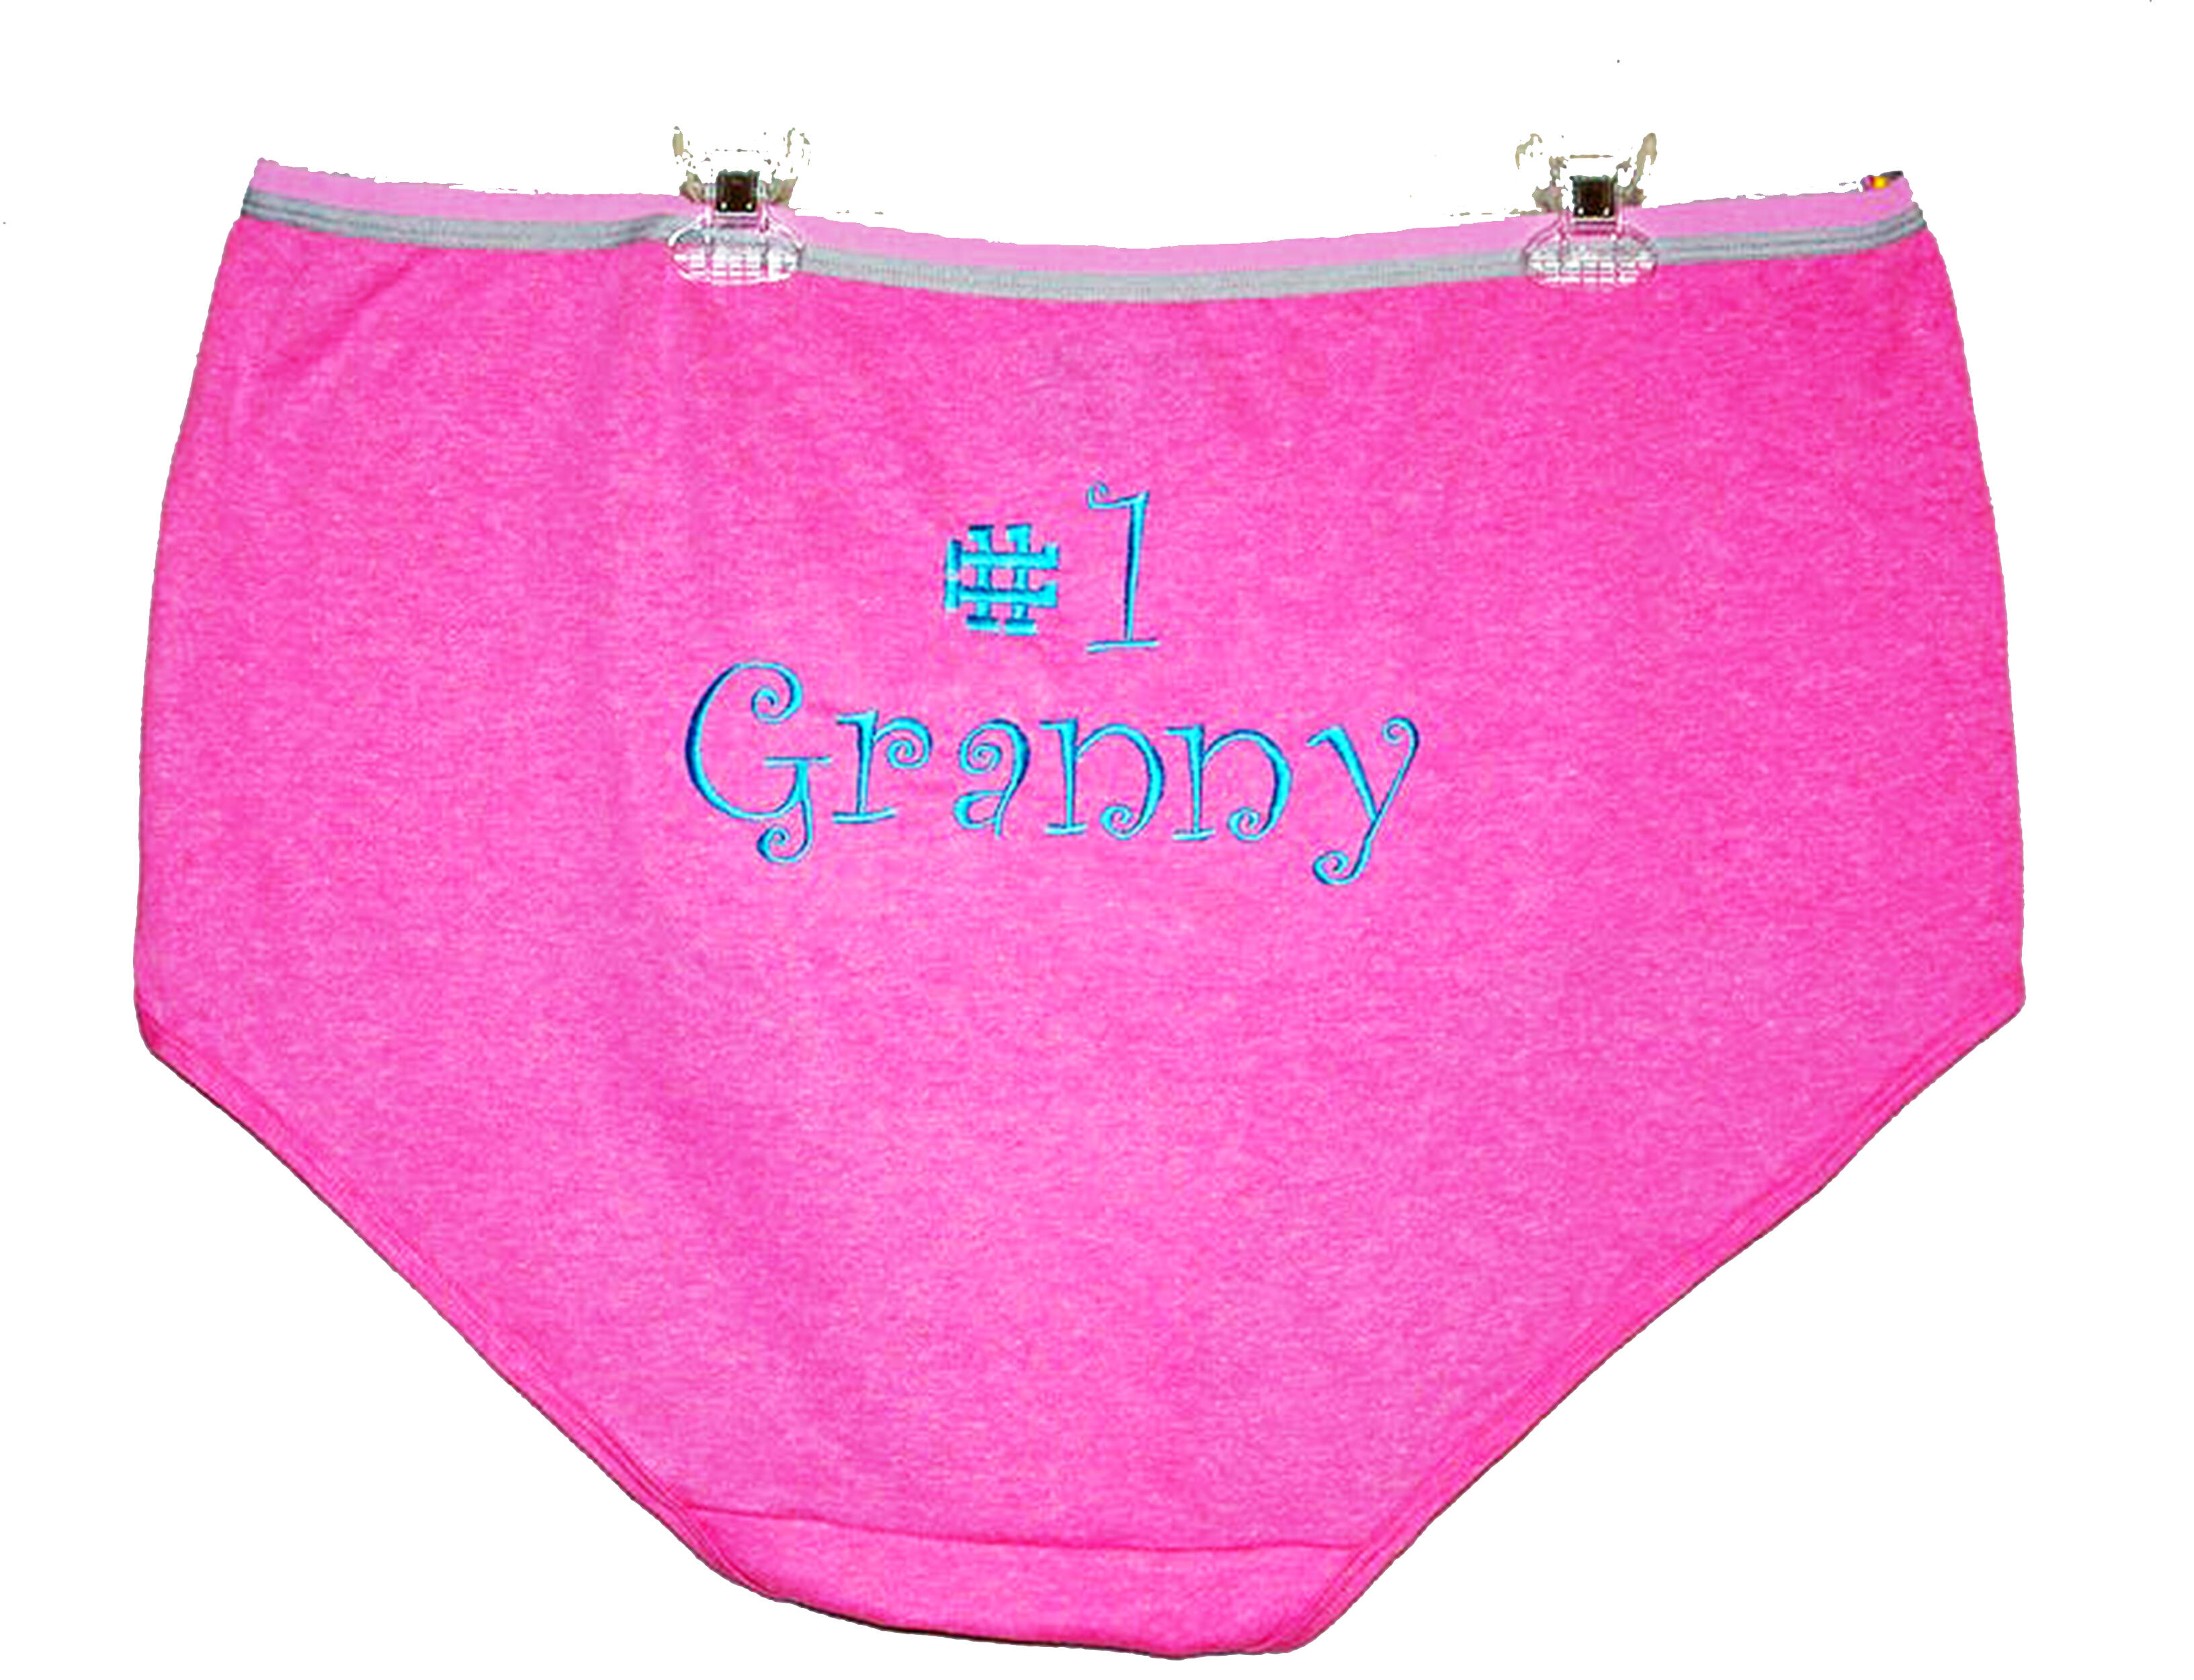 Granny Panties, Large, Gag Gift Exchange, Bridal Shower, Grandma, Mimi,  Bride, Guy, Hubby, Wife, Grammy, Personalized, Ships Today, AGFT 054